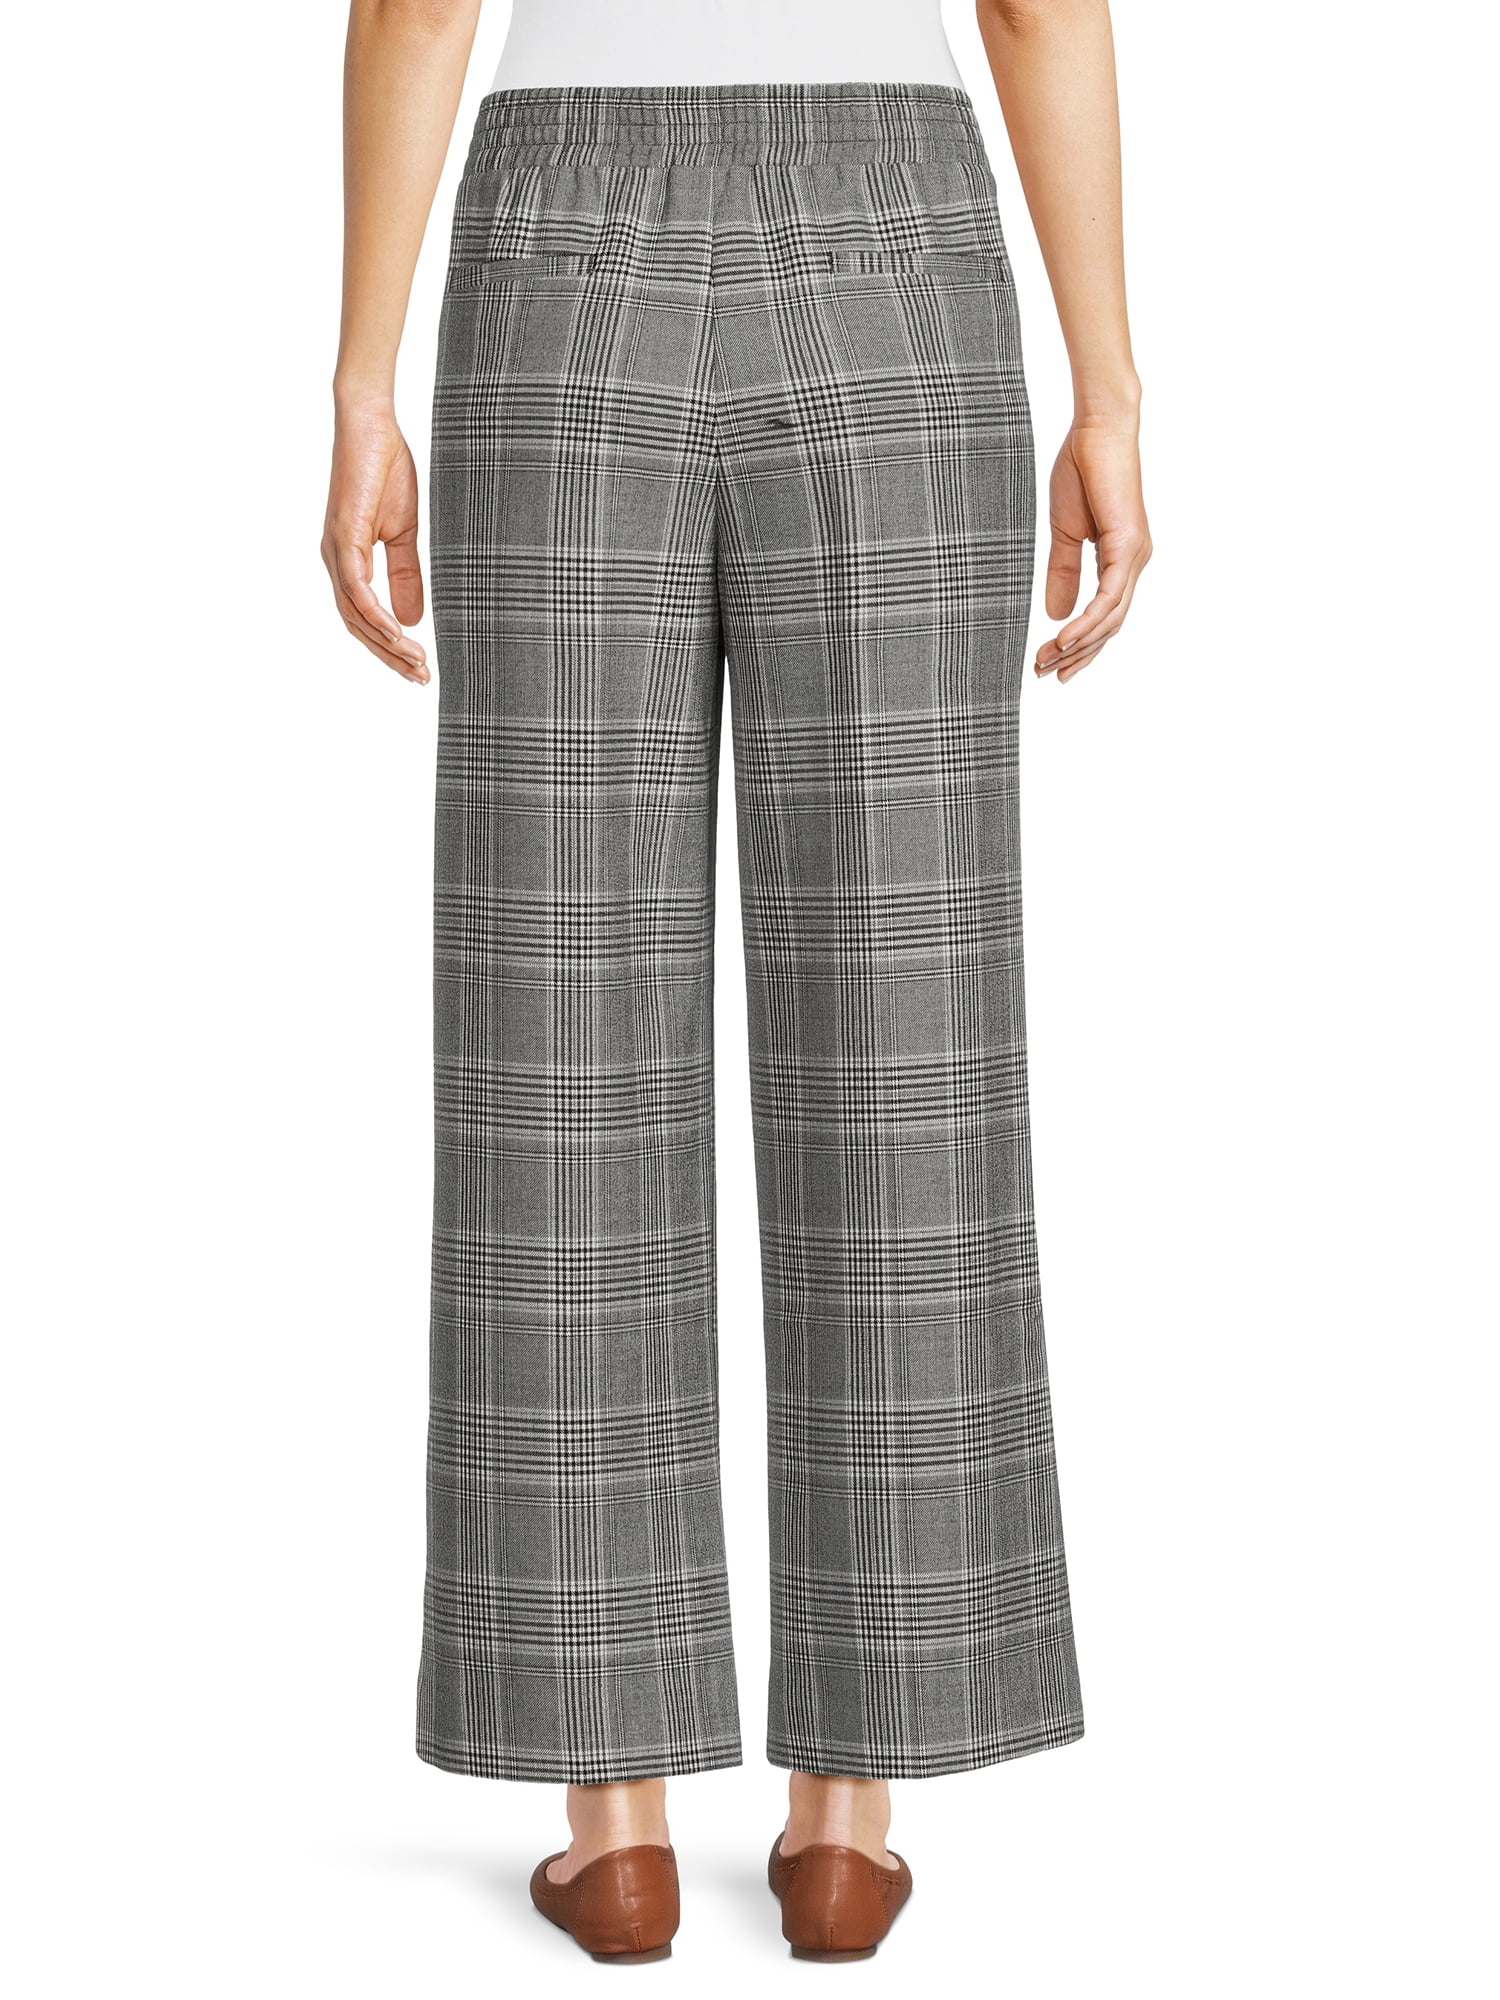 Time and Tru Women's Wide Leg Pants, 30 Inseam for Regular